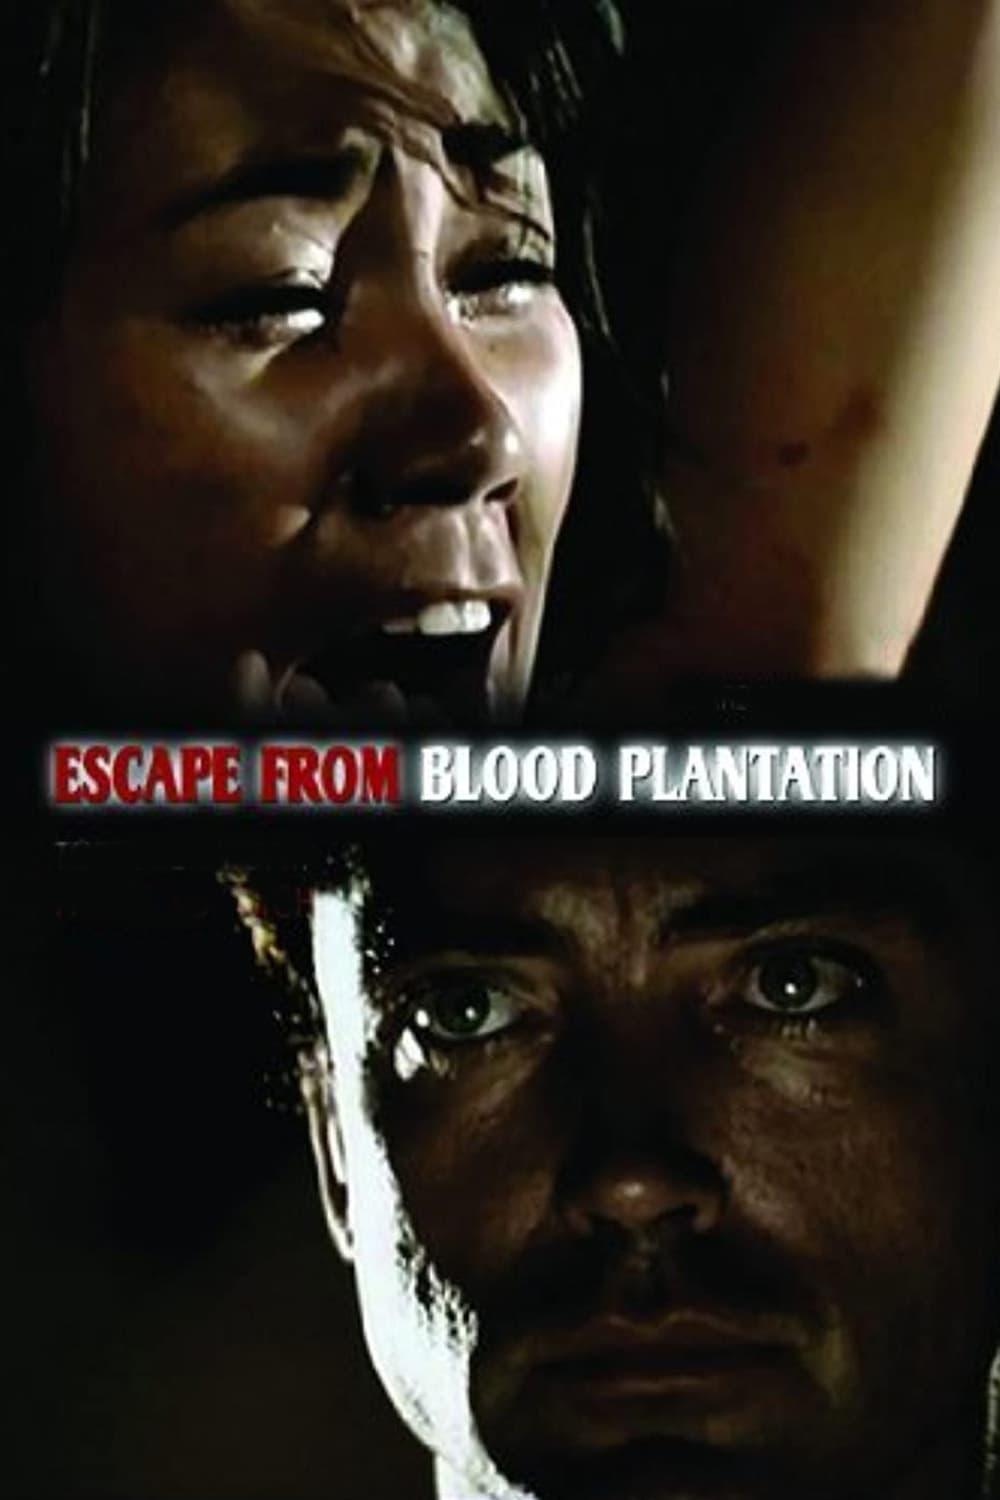 The Island of the Bloody Plantation poster